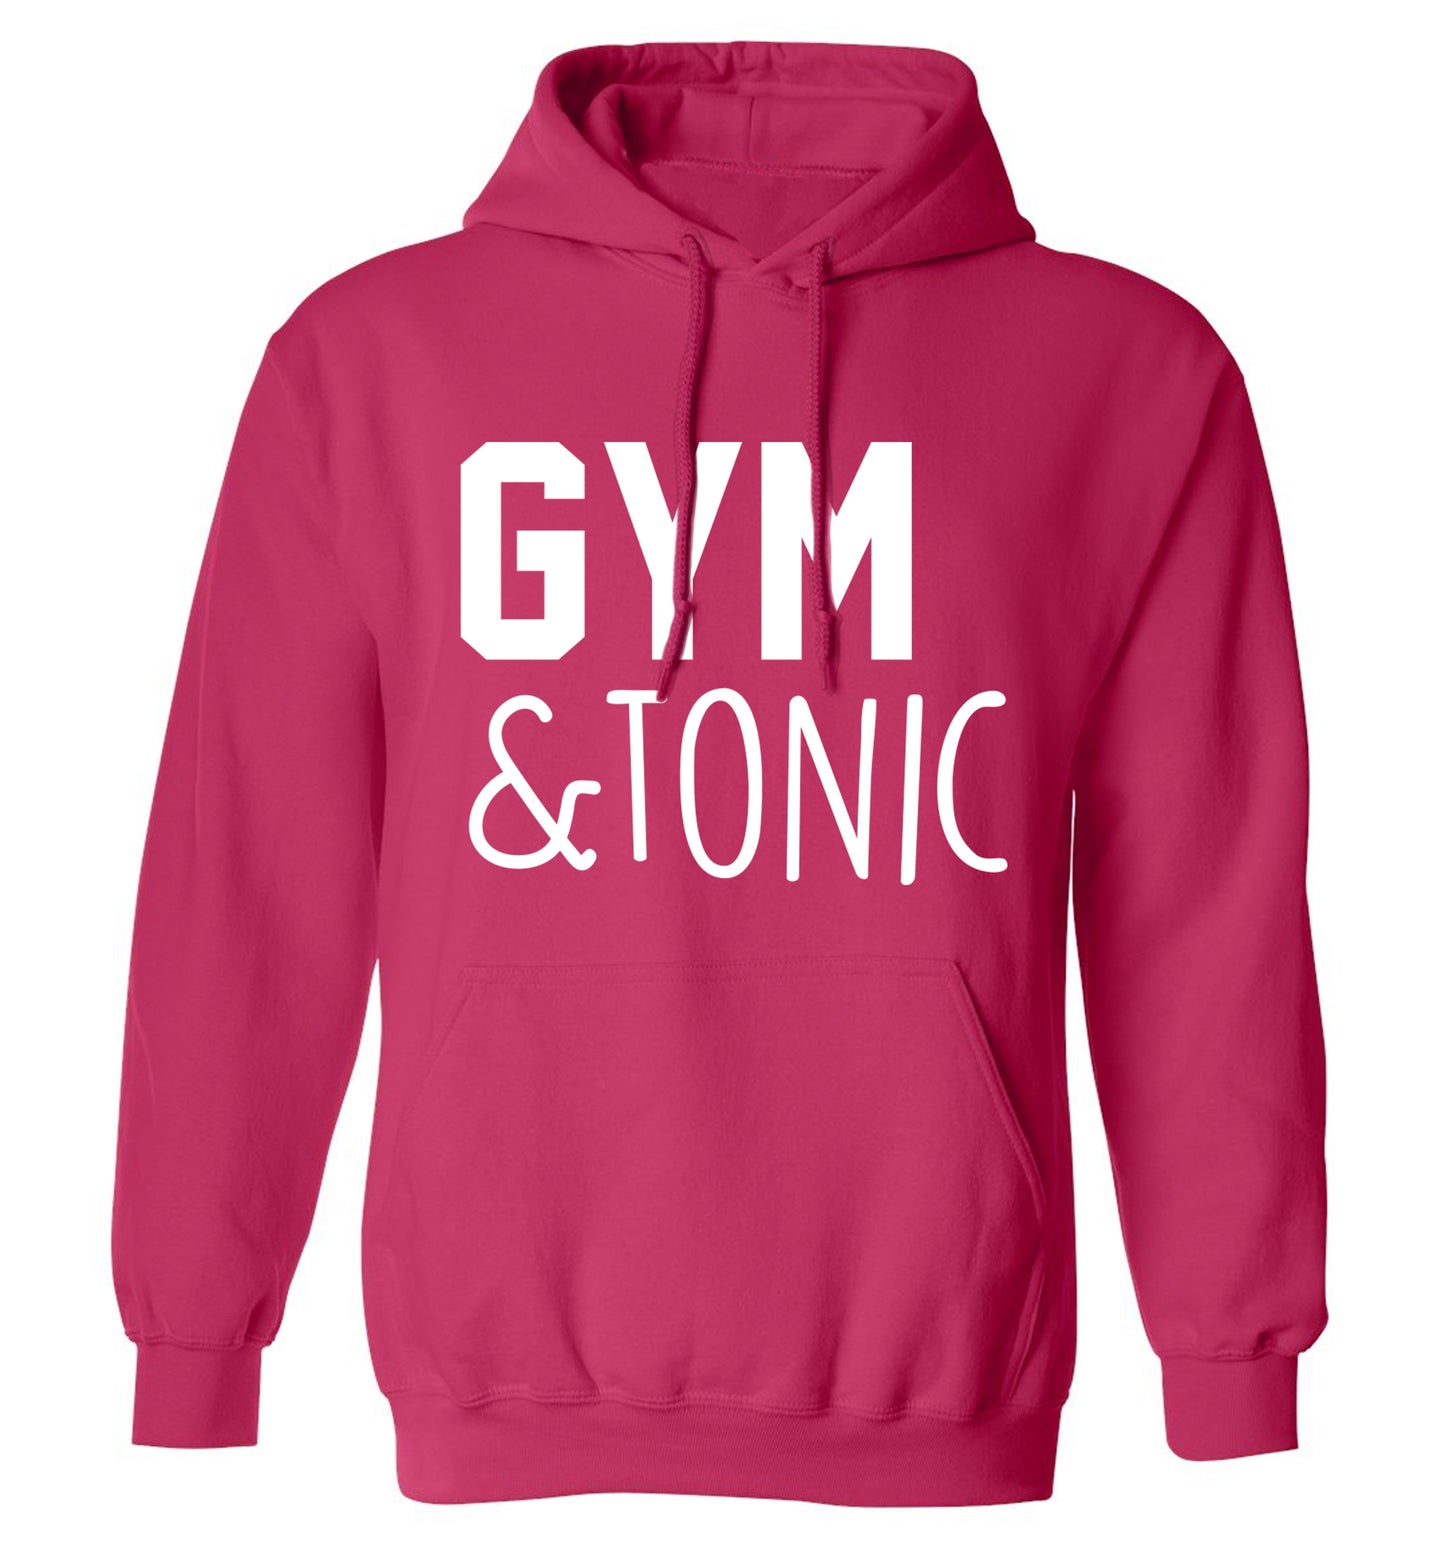 Gym and tonic adults unisex pink hoodie 2XL